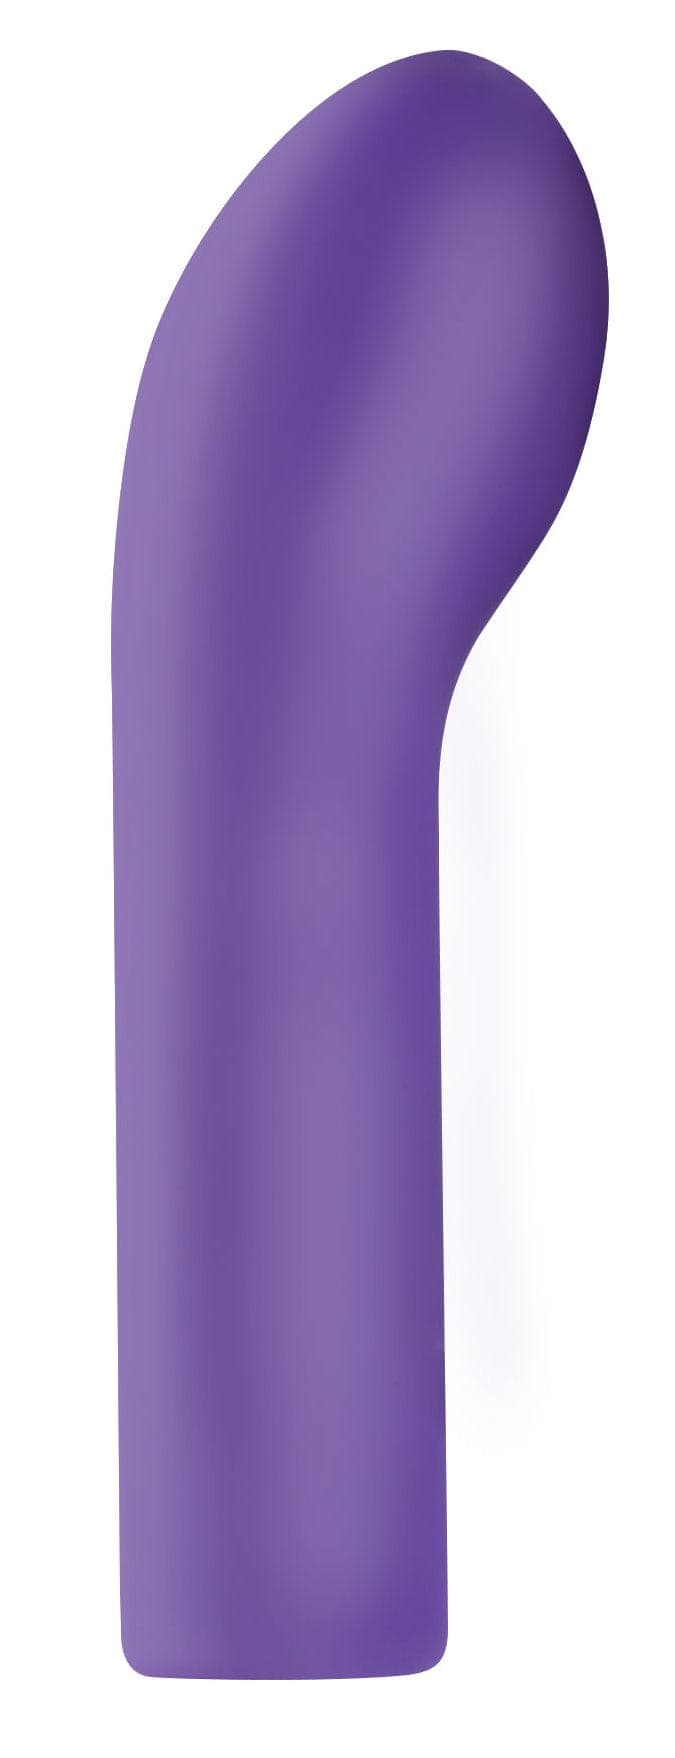 Shag The 10x Silicone of Pleaser Haus It - Finger G-spot